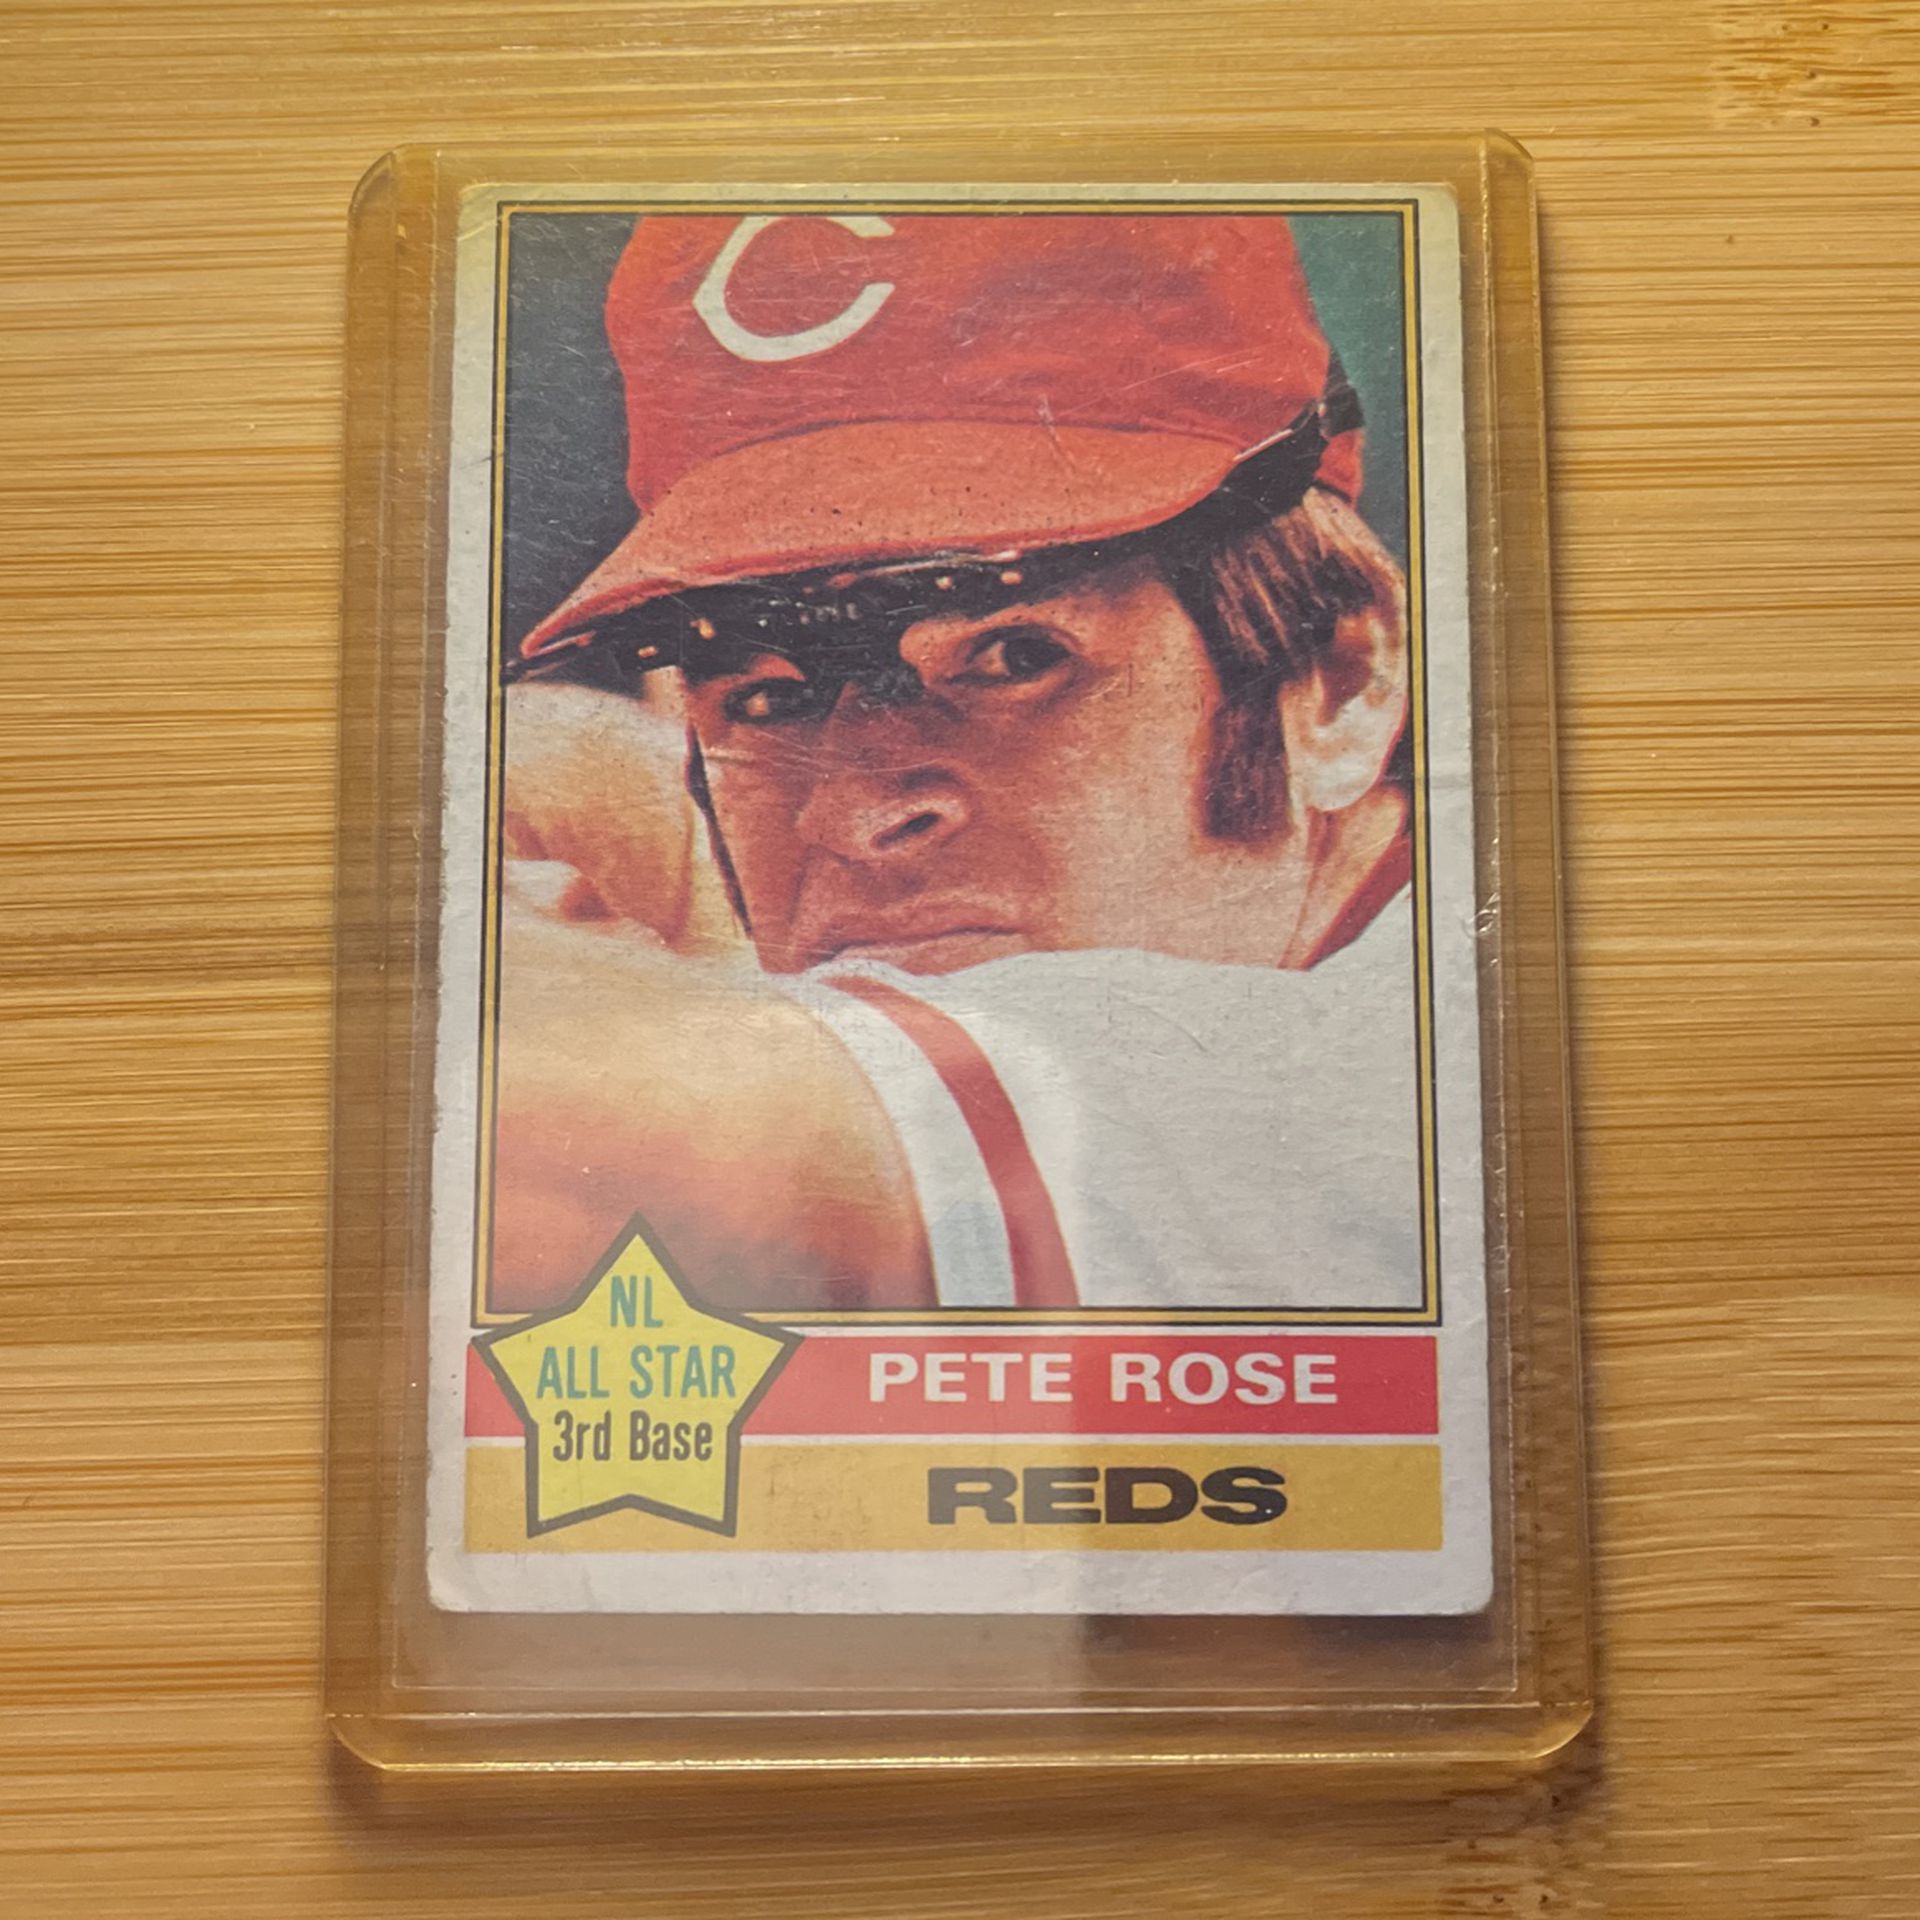 PETE ROSE (Baseball-Card) for Sale in Imperial Beach, CA - OfferUp